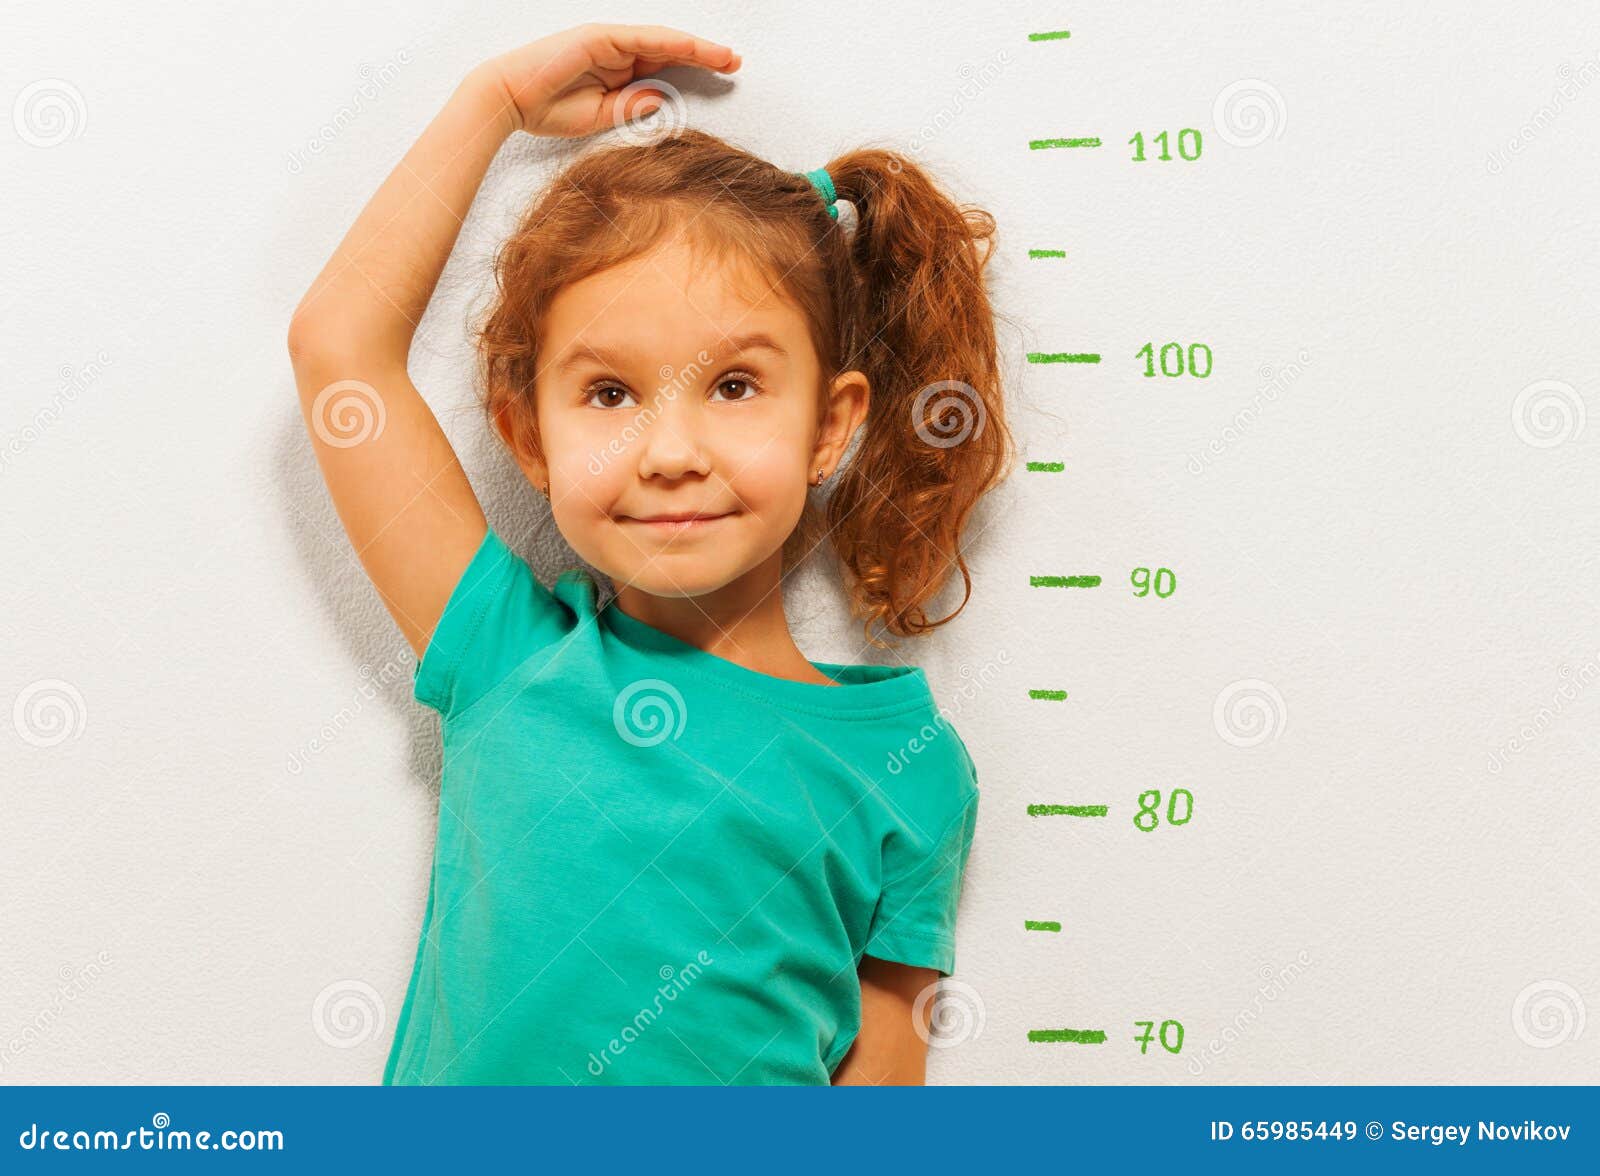 close portrait of a girl show height on wall scale